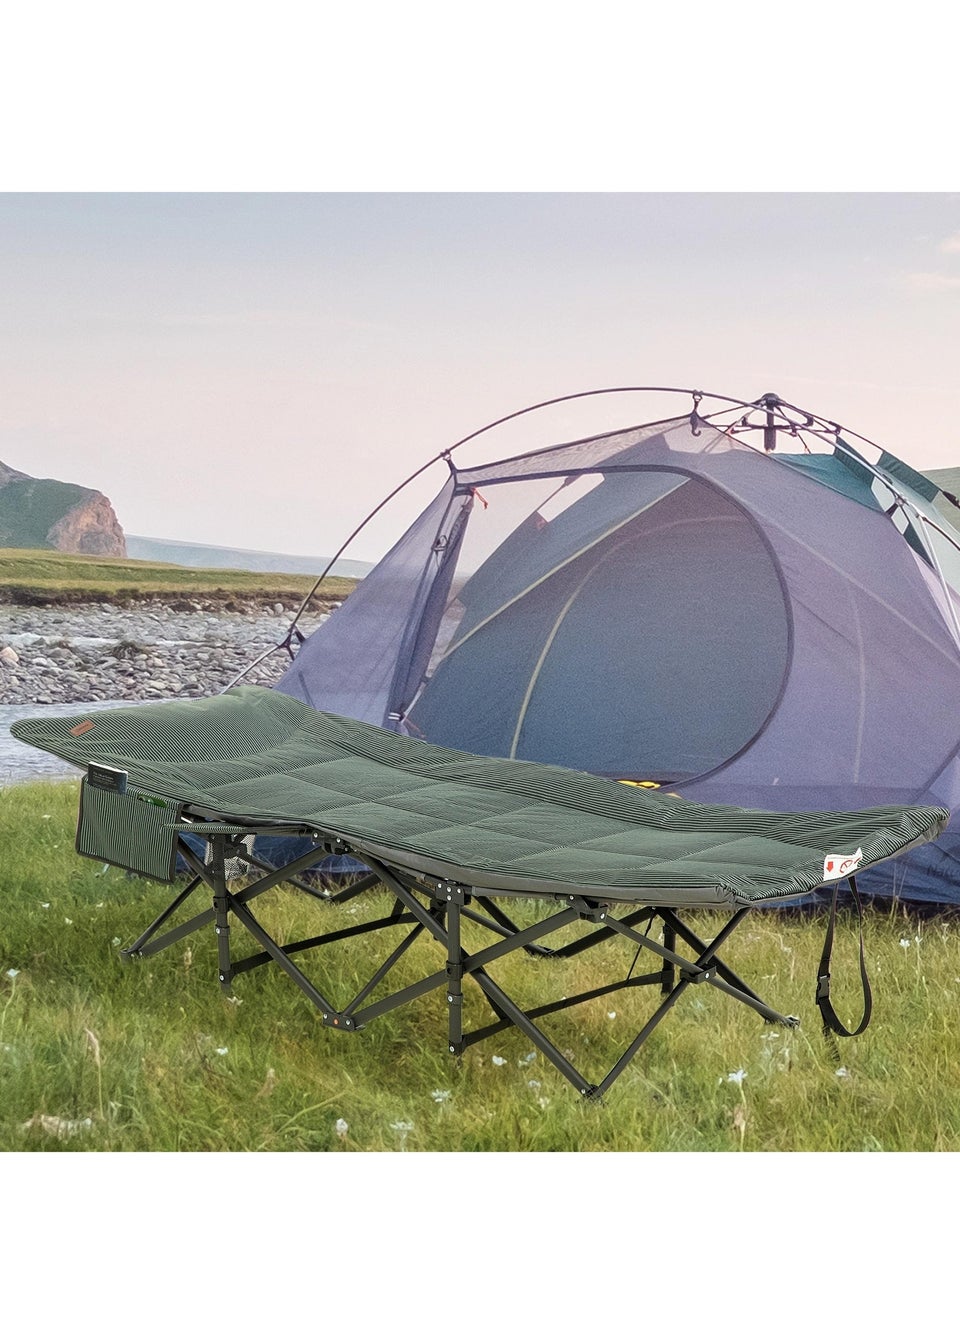 Outsunny Foldable Camping Bed w/ Carry Bag